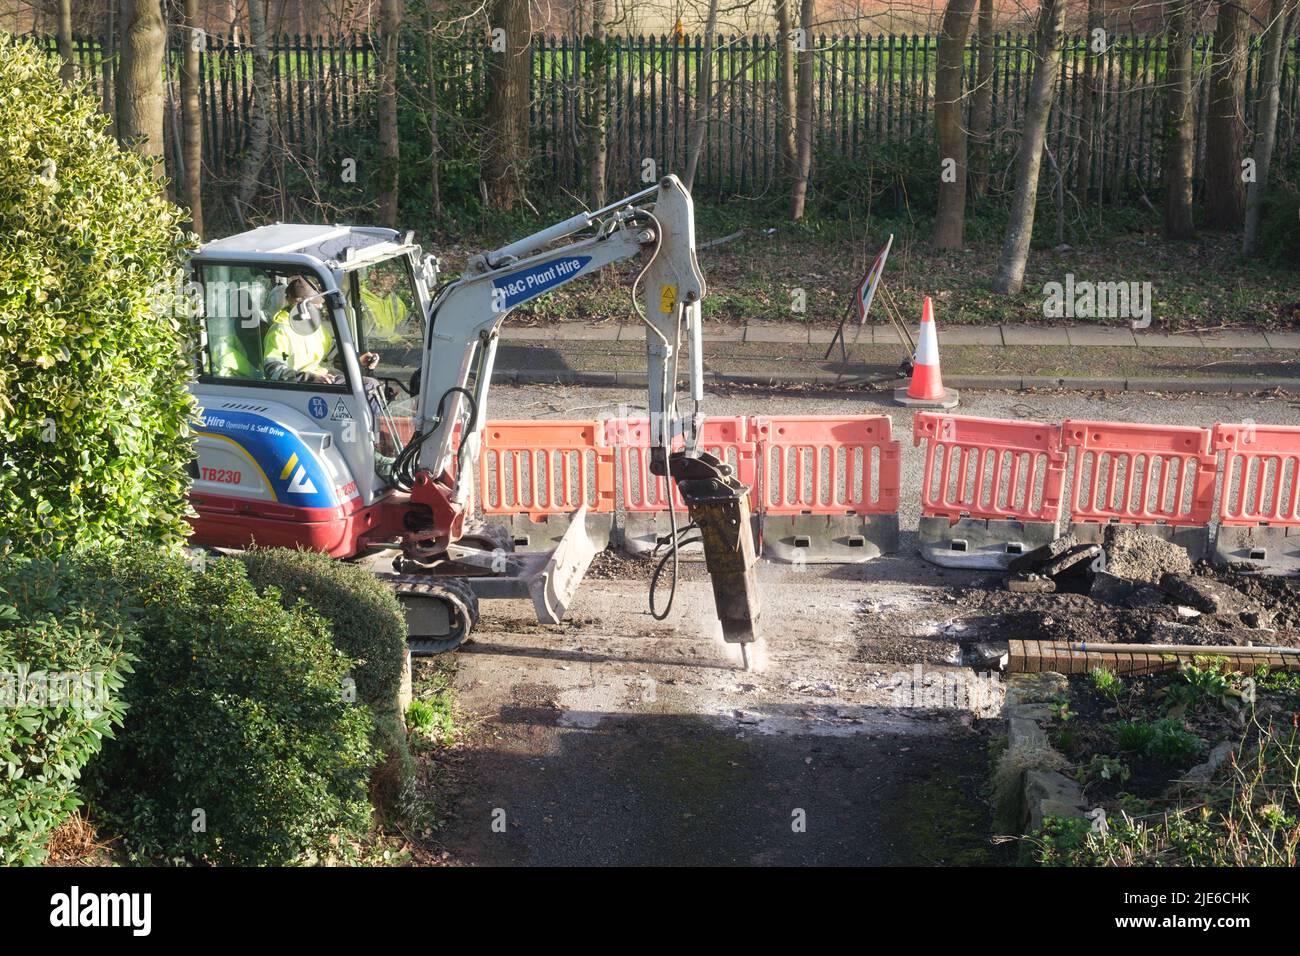 Workman using a mini excavator to dig up a pavement (sidewalk) by a road in a residential area Stock Photo